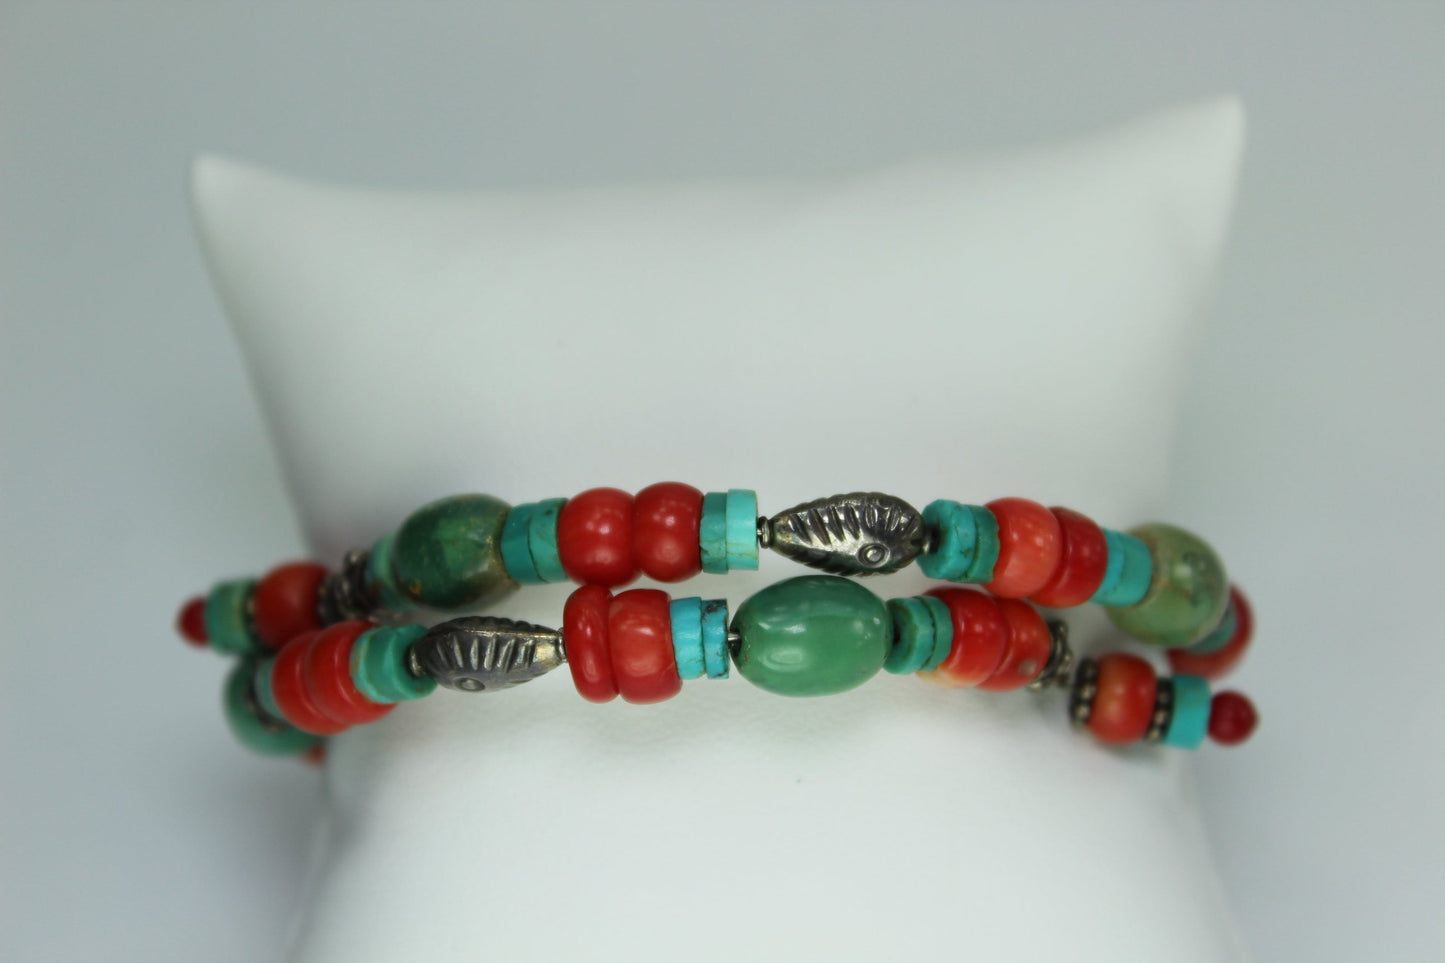 Bracelet Turquoise Coral Red Stones Silver Beads Variety Shapes Wired Adjustable fantastic colors